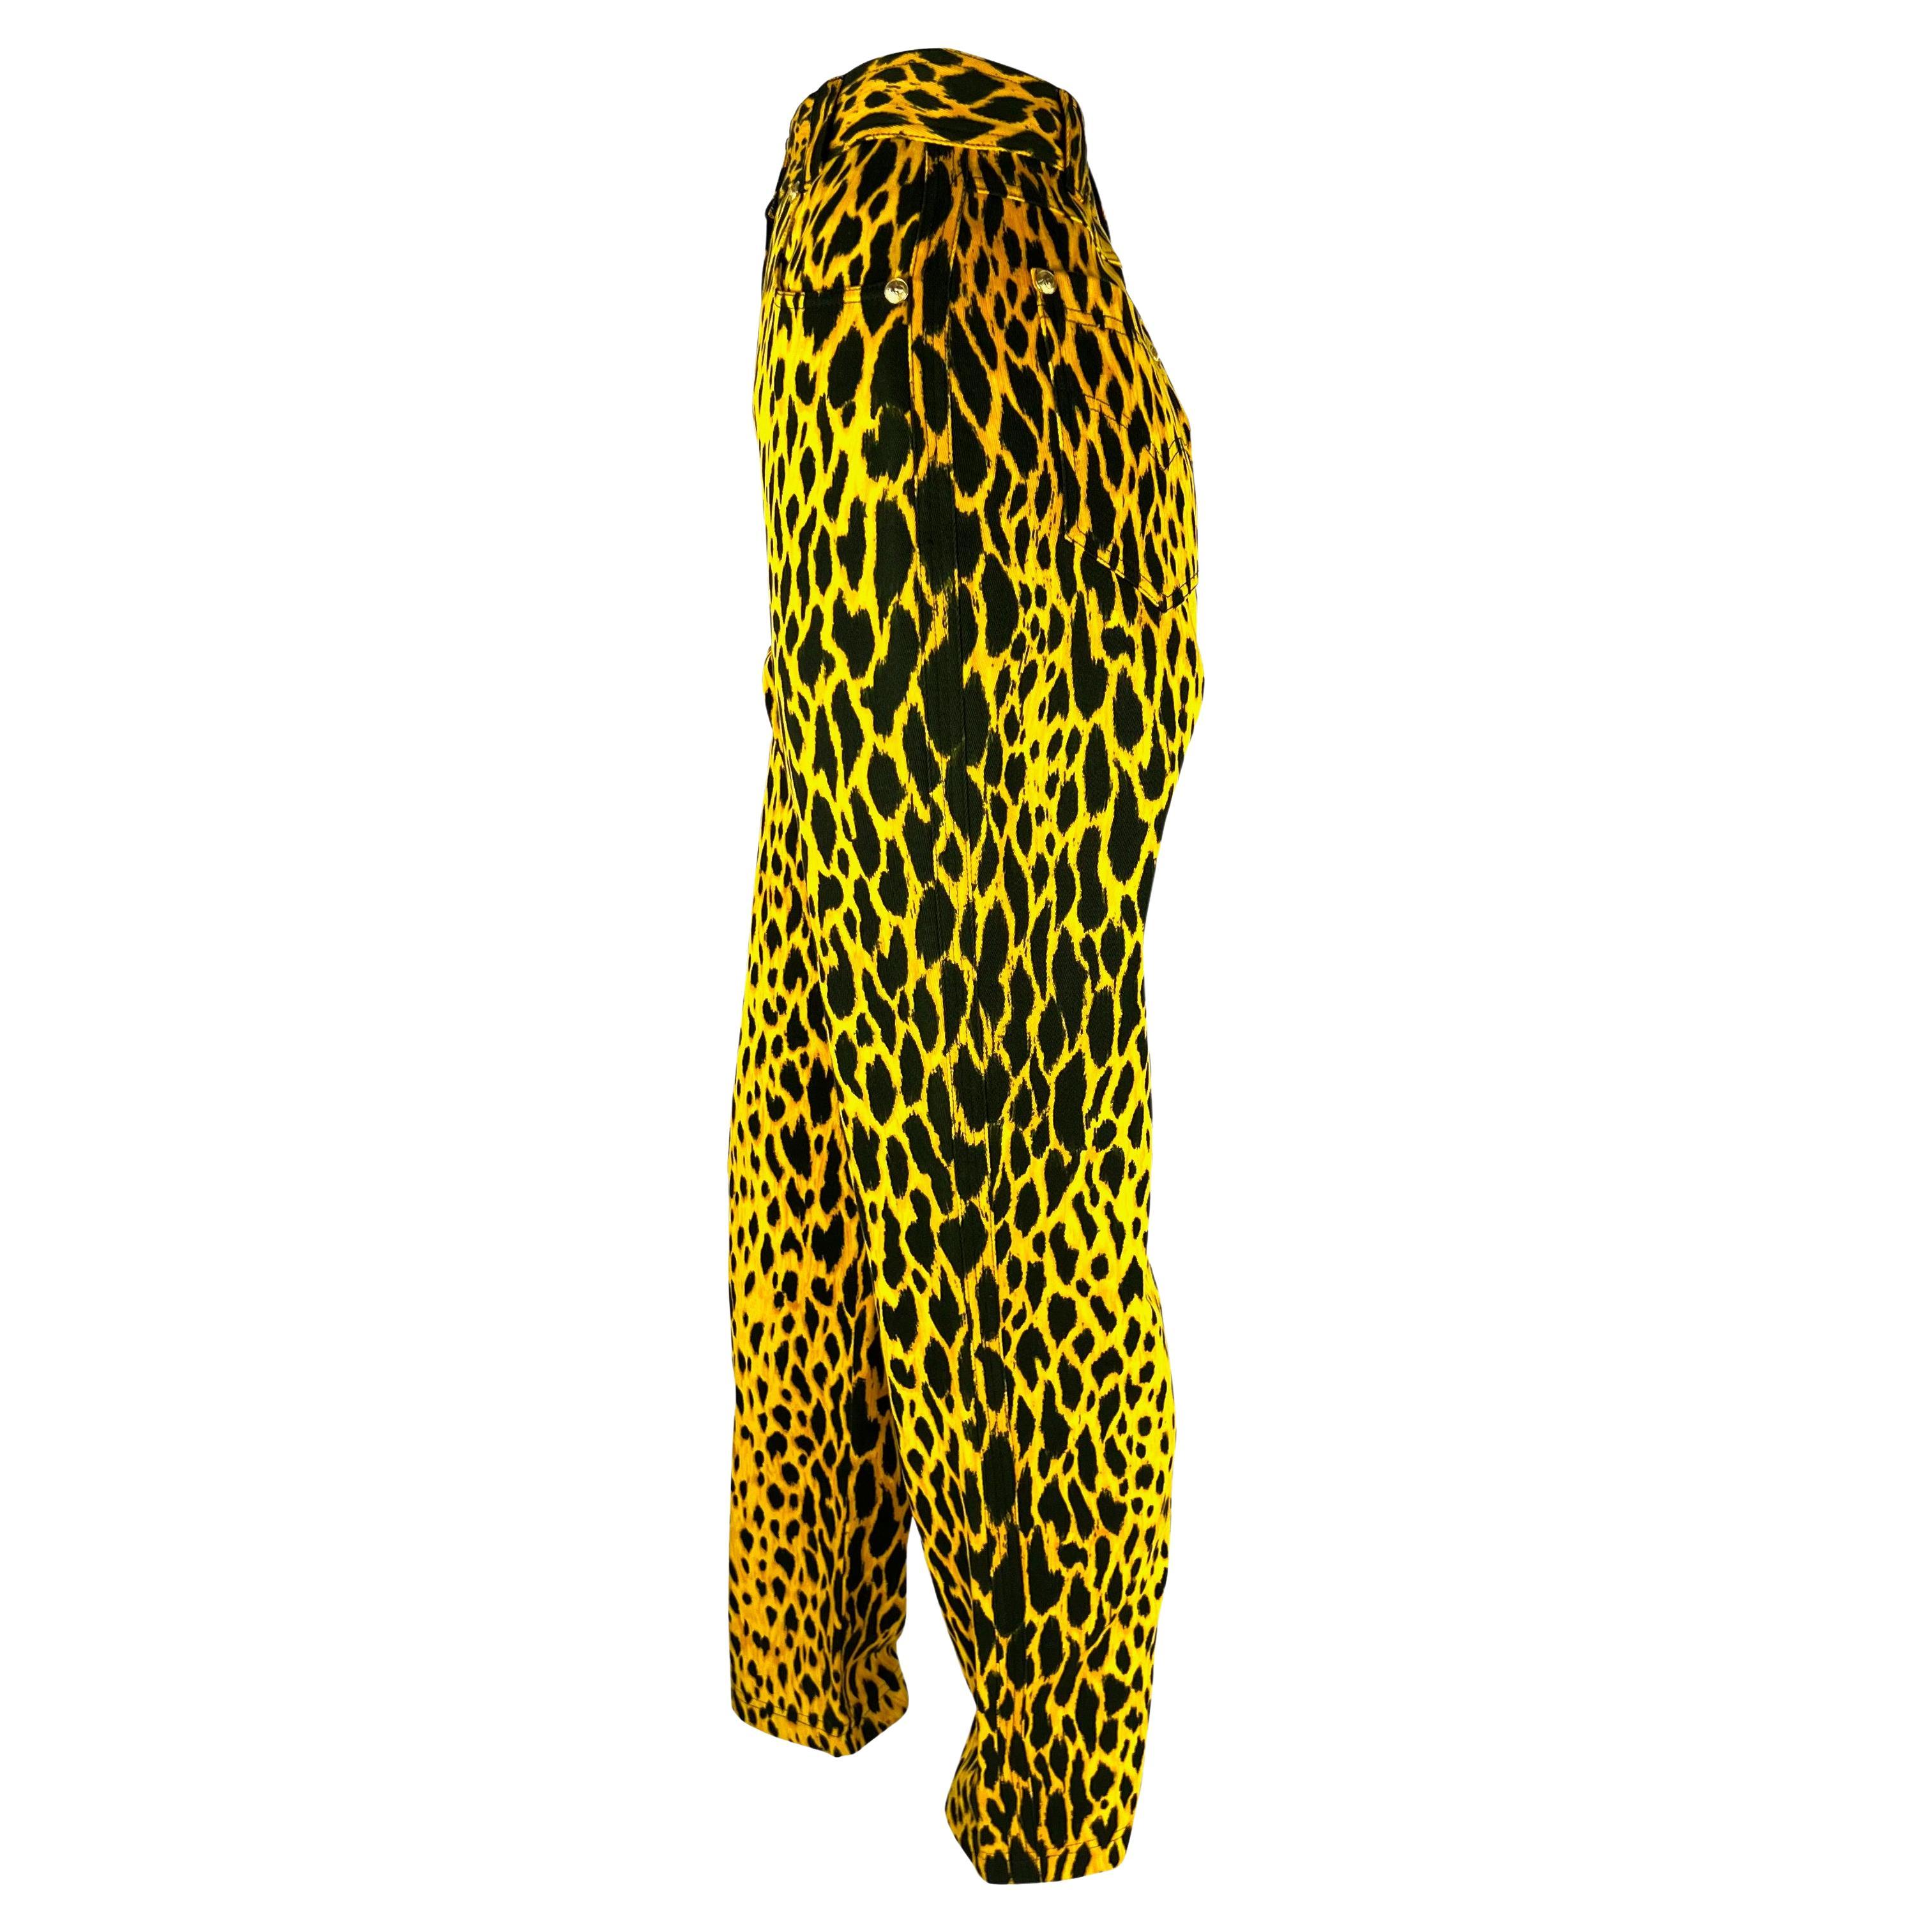 S/S 1992 Gianni Versace Runway Cheetah Print Yellow Black Cotton Stretch Jeans In Good Condition For Sale In West Hollywood, CA